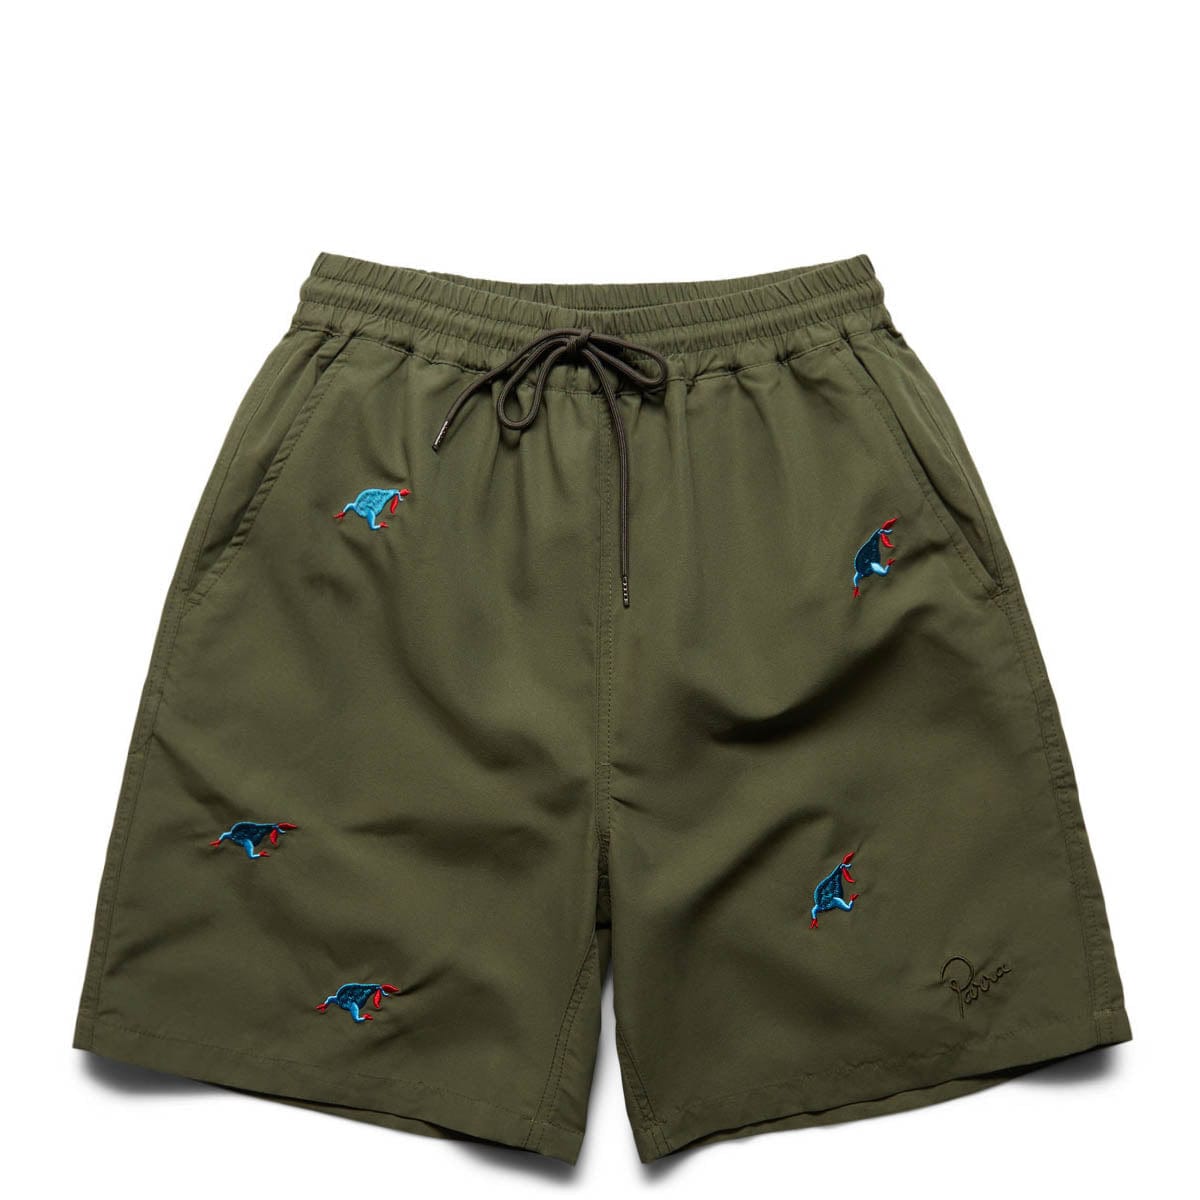 By Parra Shorts RUNNING PEAR SWIM SHORTS